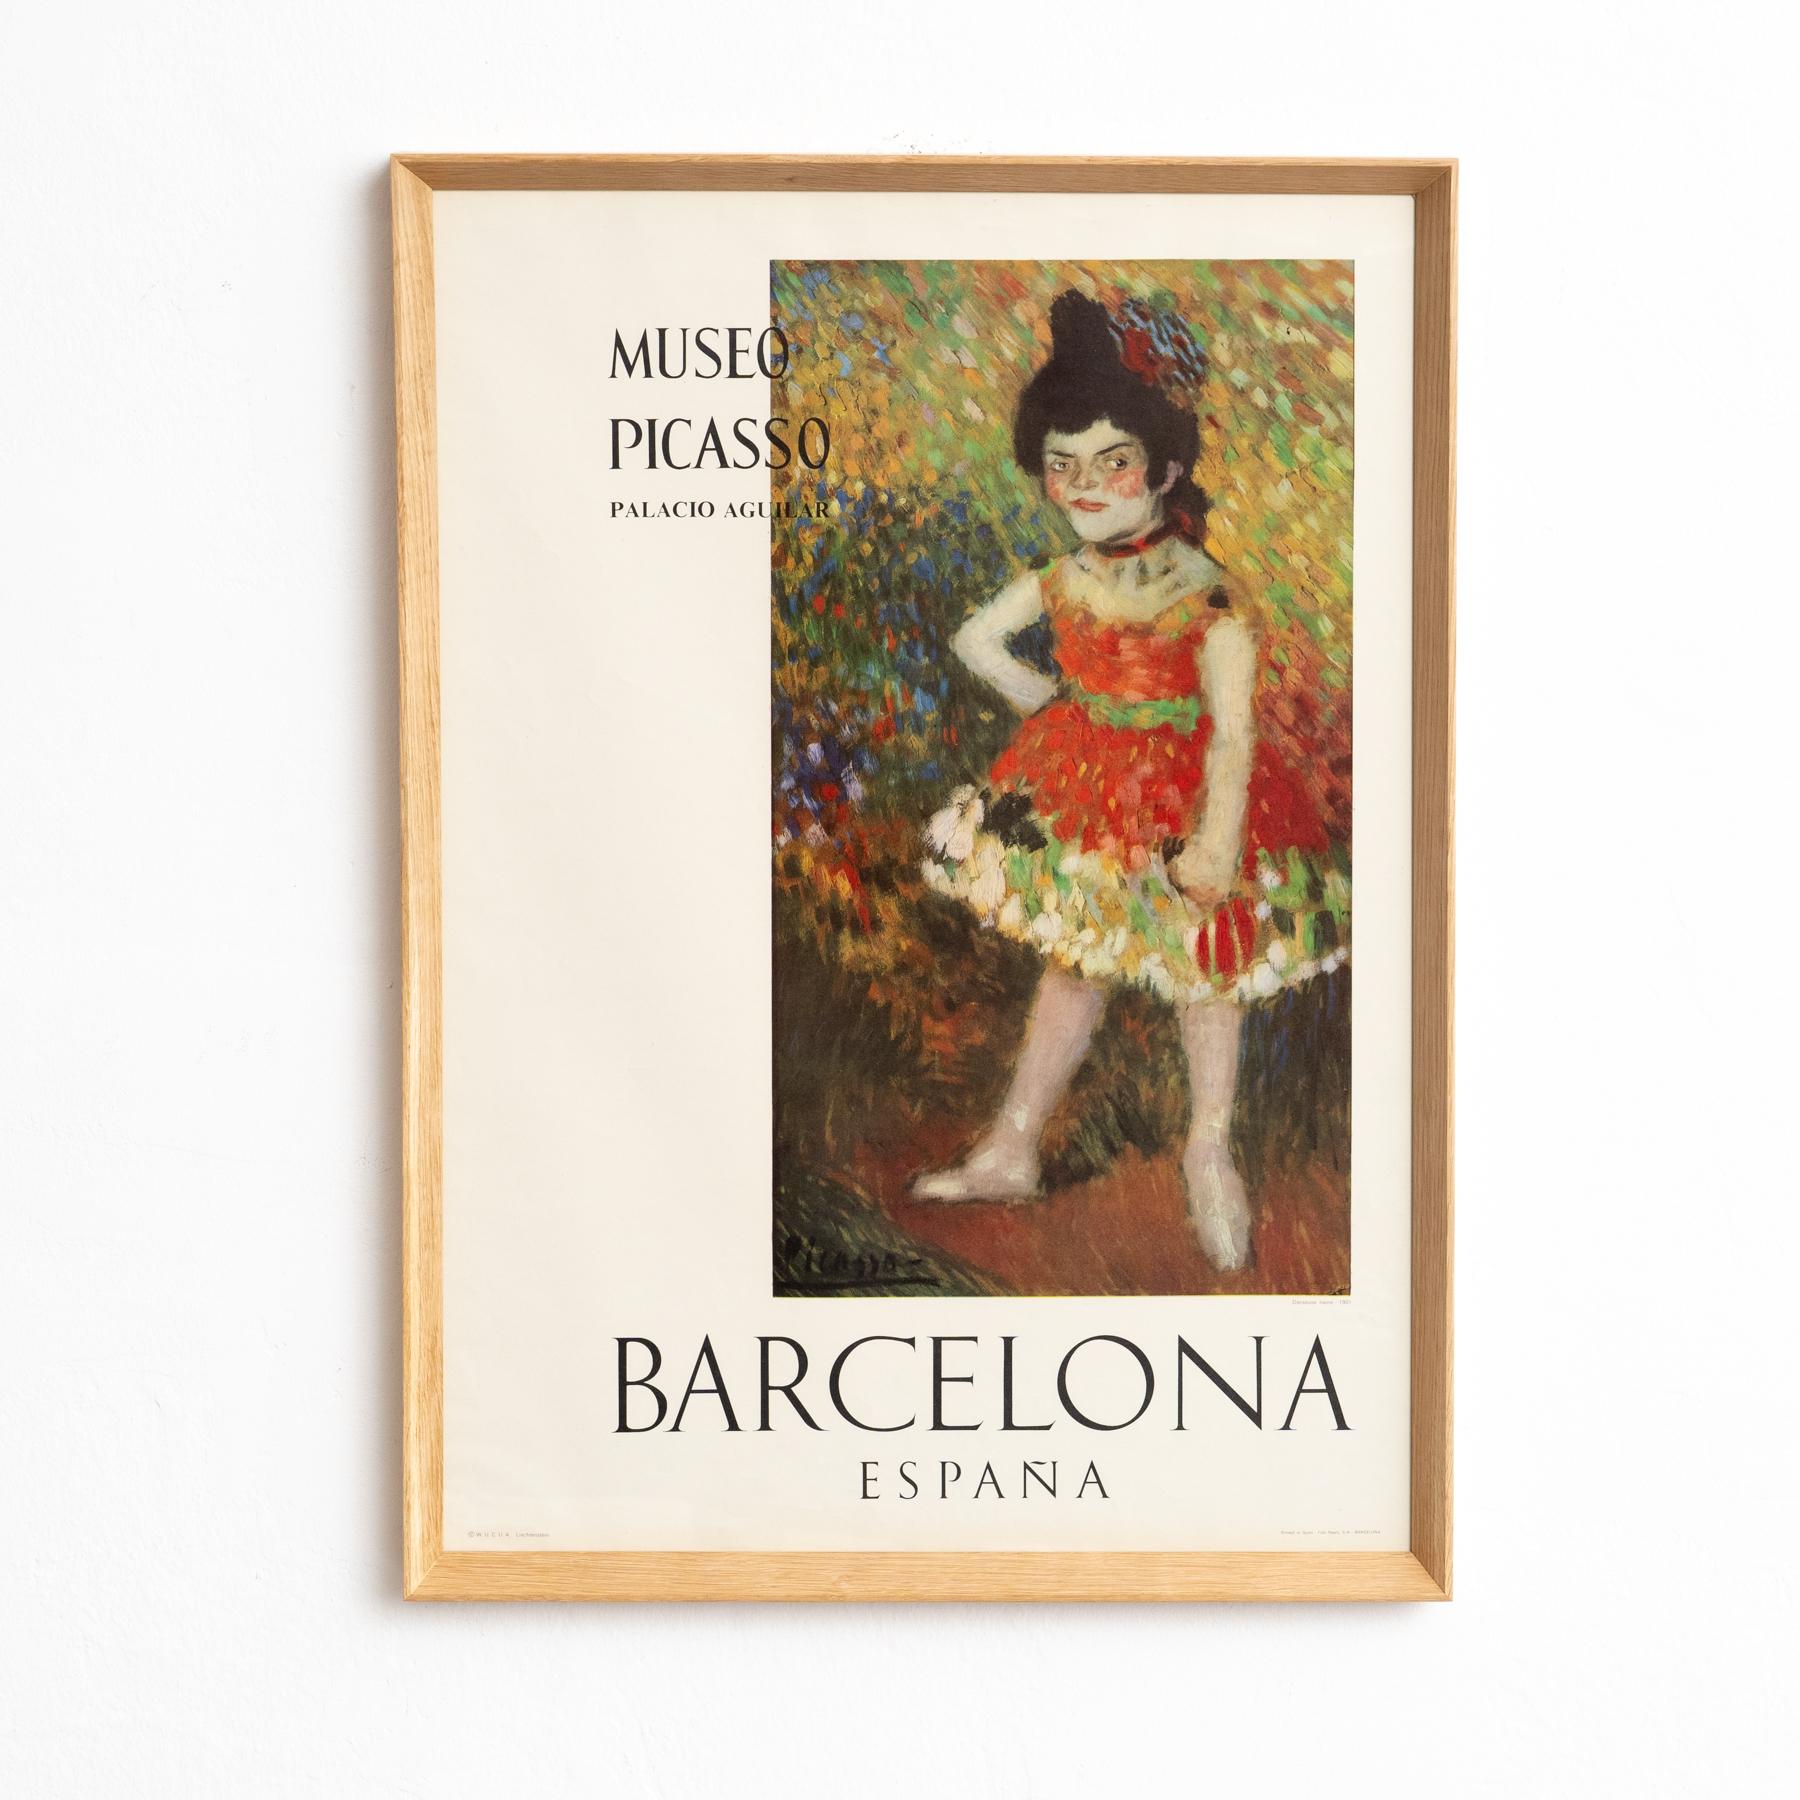 Picasso Museum Poster Danseuse Naine 1901 by Pablo Picasso.

Manufactured in Spain, circa 1966.

In original condition with minor wear consistent of age and use, preserving a beautiful patina.

Materials: 
Paper 

Dimensions: 
D 0.1 cm x W 54.5 cm x